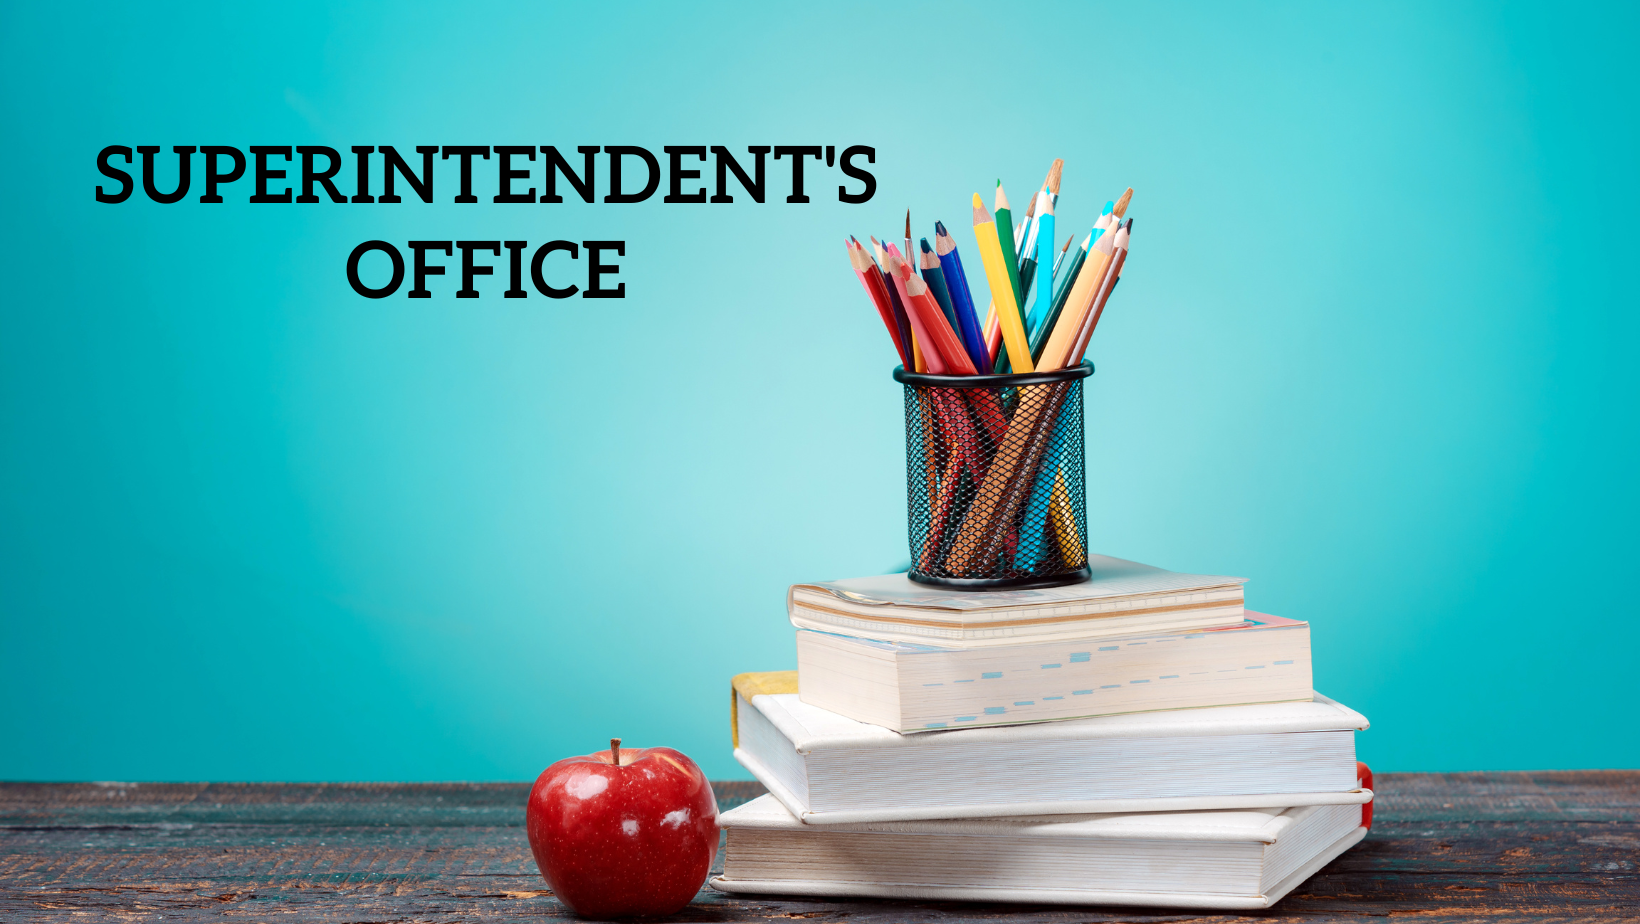 Superintendent's Office Banner, cup with colored pencils on stacked books, red apple with blue background